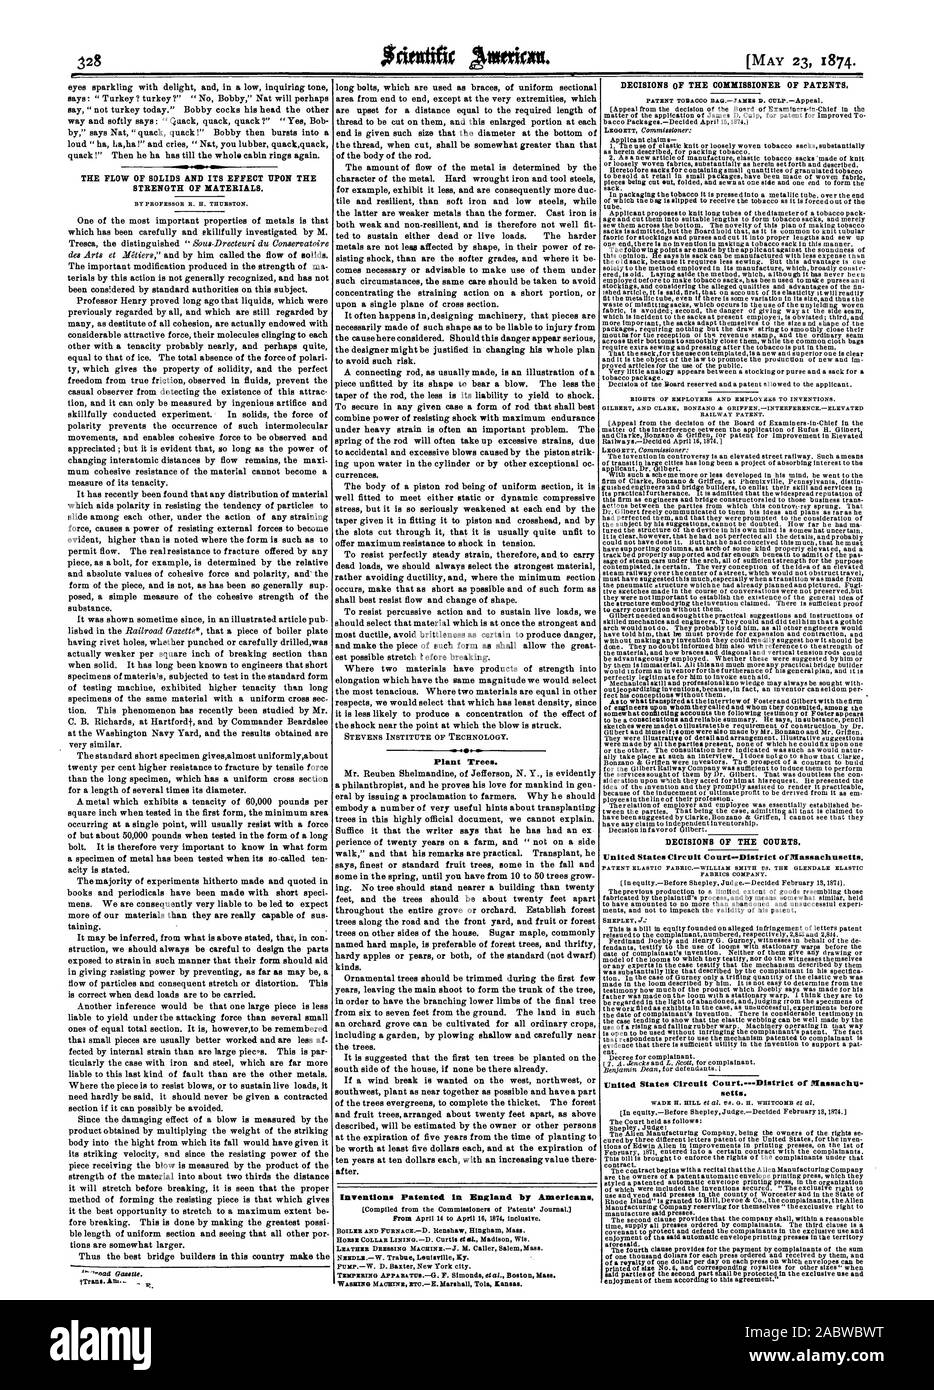 THE FLOW OF SOLIDS AND ITS EFFECT UPON THE STRENGTH OF MATERIALS. BY PROFESSOR R. H. THURSTON.  Plant Trees. Inventions Patented in England by Americans. LEATHER DRESSING MACHINEJ. M. Caller SalemMaea. DECISIONS OF THE COMMISSIONER OF PATENTS PATENT TOBACCO BAGJAMES D. CULPAppeal. RIGHTS OF EMPLOYERS AND EMPLOYEES TO INVENTIONS. GILBERT AND CLARK BONZANO A GRIFFENINTERFERENCEELEVATED RAILWAY PATENT. DECISIONS OF THE COURTS. FABRICS COMPANY. United States Circuit CourtDistrict of Iffassachil setts., scientific american, 1874-05-23 Stock Photo